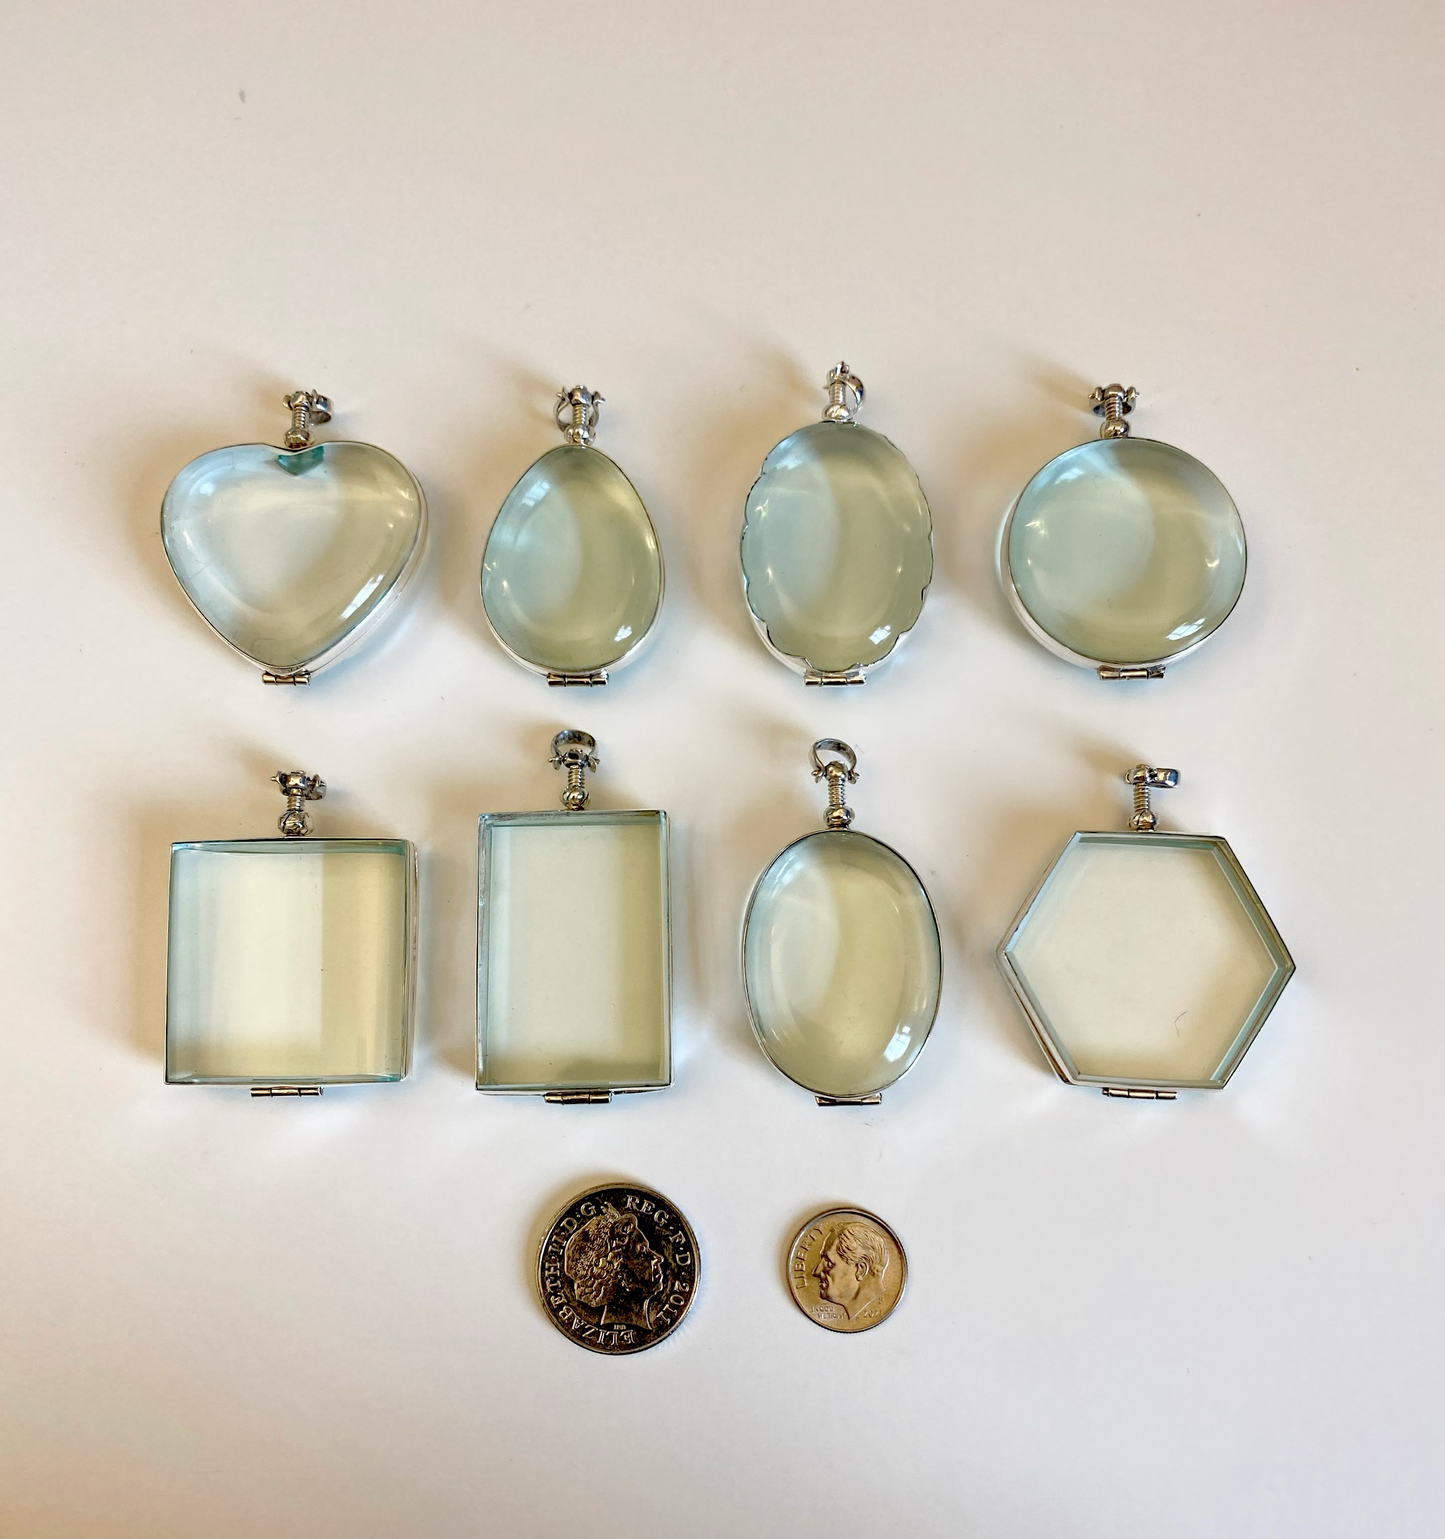 Large Gold Plated Glass Lockets- Choose a Shape